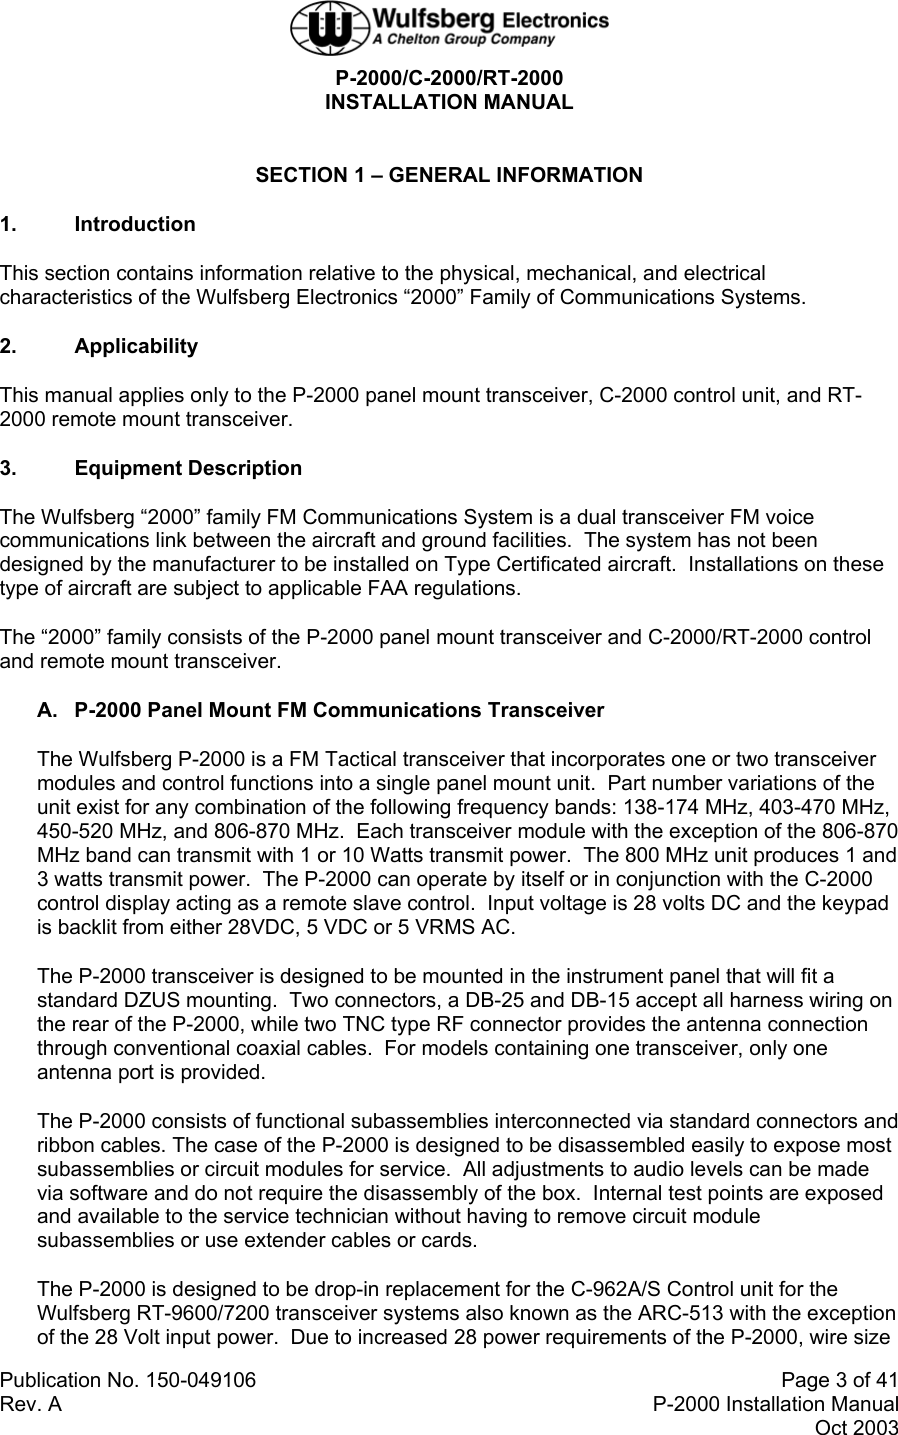  P-2000/C-2000/RT-2000 INSTALLATION MANUAL  Publication No. 150-049106  Page 3 of 41 Rev. A  P-2000 Installation Manual Oct 2003  SECTION 1 – GENERAL INFORMATION 1. Introduction This section contains information relative to the physical, mechanical, and electrical characteristics of the Wulfsberg Electronics “2000” Family of Communications Systems. 2. Applicability This manual applies only to the P-2000 panel mount transceiver, C-2000 control unit, and RT-2000 remote mount transceiver. 3. Equipment Description The Wulfsberg “2000” family FM Communications System is a dual transceiver FM voice communications link between the aircraft and ground facilities.  The system has not been designed by the manufacturer to be installed on Type Certificated aircraft.  Installations on these type of aircraft are subject to applicable FAA regulations. The “2000” family consists of the P-2000 panel mount transceiver and C-2000/RT-2000 control and remote mount transceiver. A.  P-2000 Panel Mount FM Communications Transceiver The Wulfsberg P-2000 is a FM Tactical transceiver that incorporates one or two transceiver modules and control functions into a single panel mount unit.  Part number variations of the unit exist for any combination of the following frequency bands: 138-174 MHz, 403-470 MHz, 450-520 MHz, and 806-870 MHz.  Each transceiver module with the exception of the 806-870 MHz band can transmit with 1 or 10 Watts transmit power.  The 800 MHz unit produces 1 and 3 watts transmit power.  The P-2000 can operate by itself or in conjunction with the C-2000 control display acting as a remote slave control.  Input voltage is 28 volts DC and the keypad is backlit from either 28VDC, 5 VDC or 5 VRMS AC. The P-2000 transceiver is designed to be mounted in the instrument panel that will fit a standard DZUS mounting.  Two connectors, a DB-25 and DB-15 accept all harness wiring on the rear of the P-2000, while two TNC type RF connector provides the antenna connection through conventional coaxial cables.  For models containing one transceiver, only one antenna port is provided. The P-2000 consists of functional subassemblies interconnected via standard connectors and ribbon cables. The case of the P-2000 is designed to be disassembled easily to expose most subassemblies or circuit modules for service.  All adjustments to audio levels can be made via software and do not require the disassembly of the box.  Internal test points are exposed and available to the service technician without having to remove circuit module subassemblies or use extender cables or cards. The P-2000 is designed to be drop-in replacement for the C-962A/S Control unit for the Wulfsberg RT-9600/7200 transceiver systems also known as the ARC-513 with the exception of the 28 Volt input power.  Due to increased 28 power requirements of the P-2000, wire size 